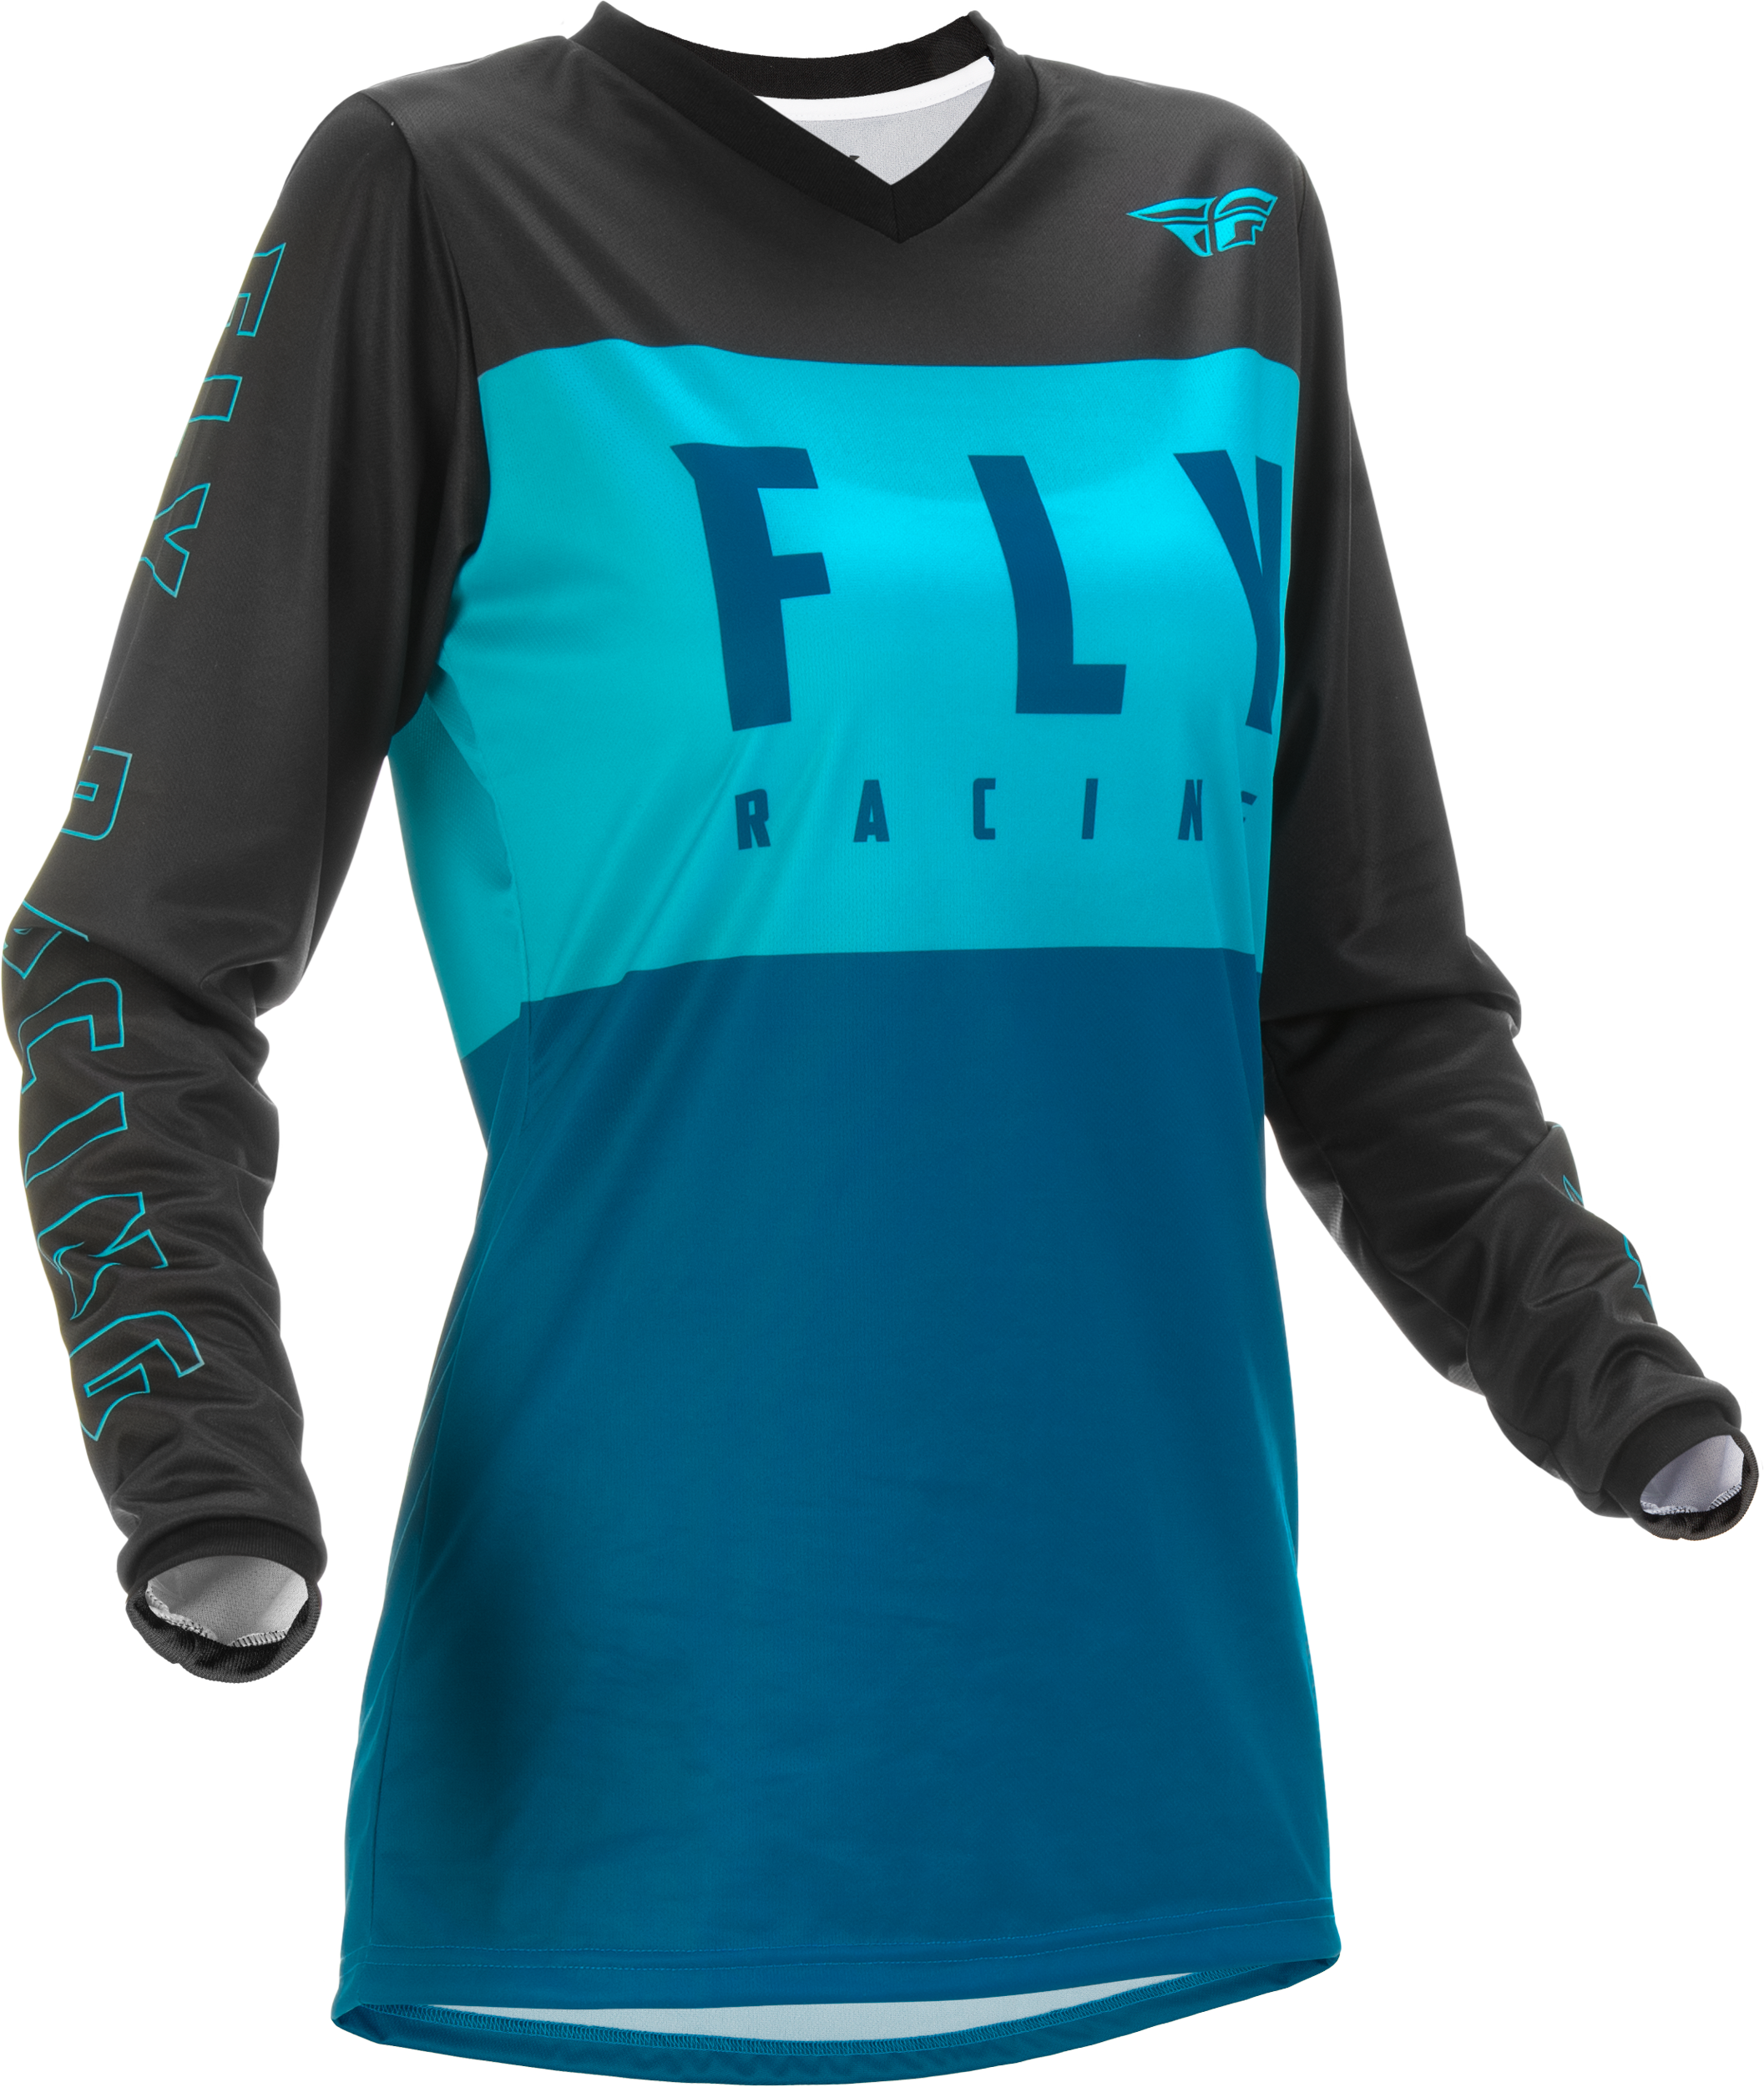 Fly Racing Adult Women's F-16 Jersey